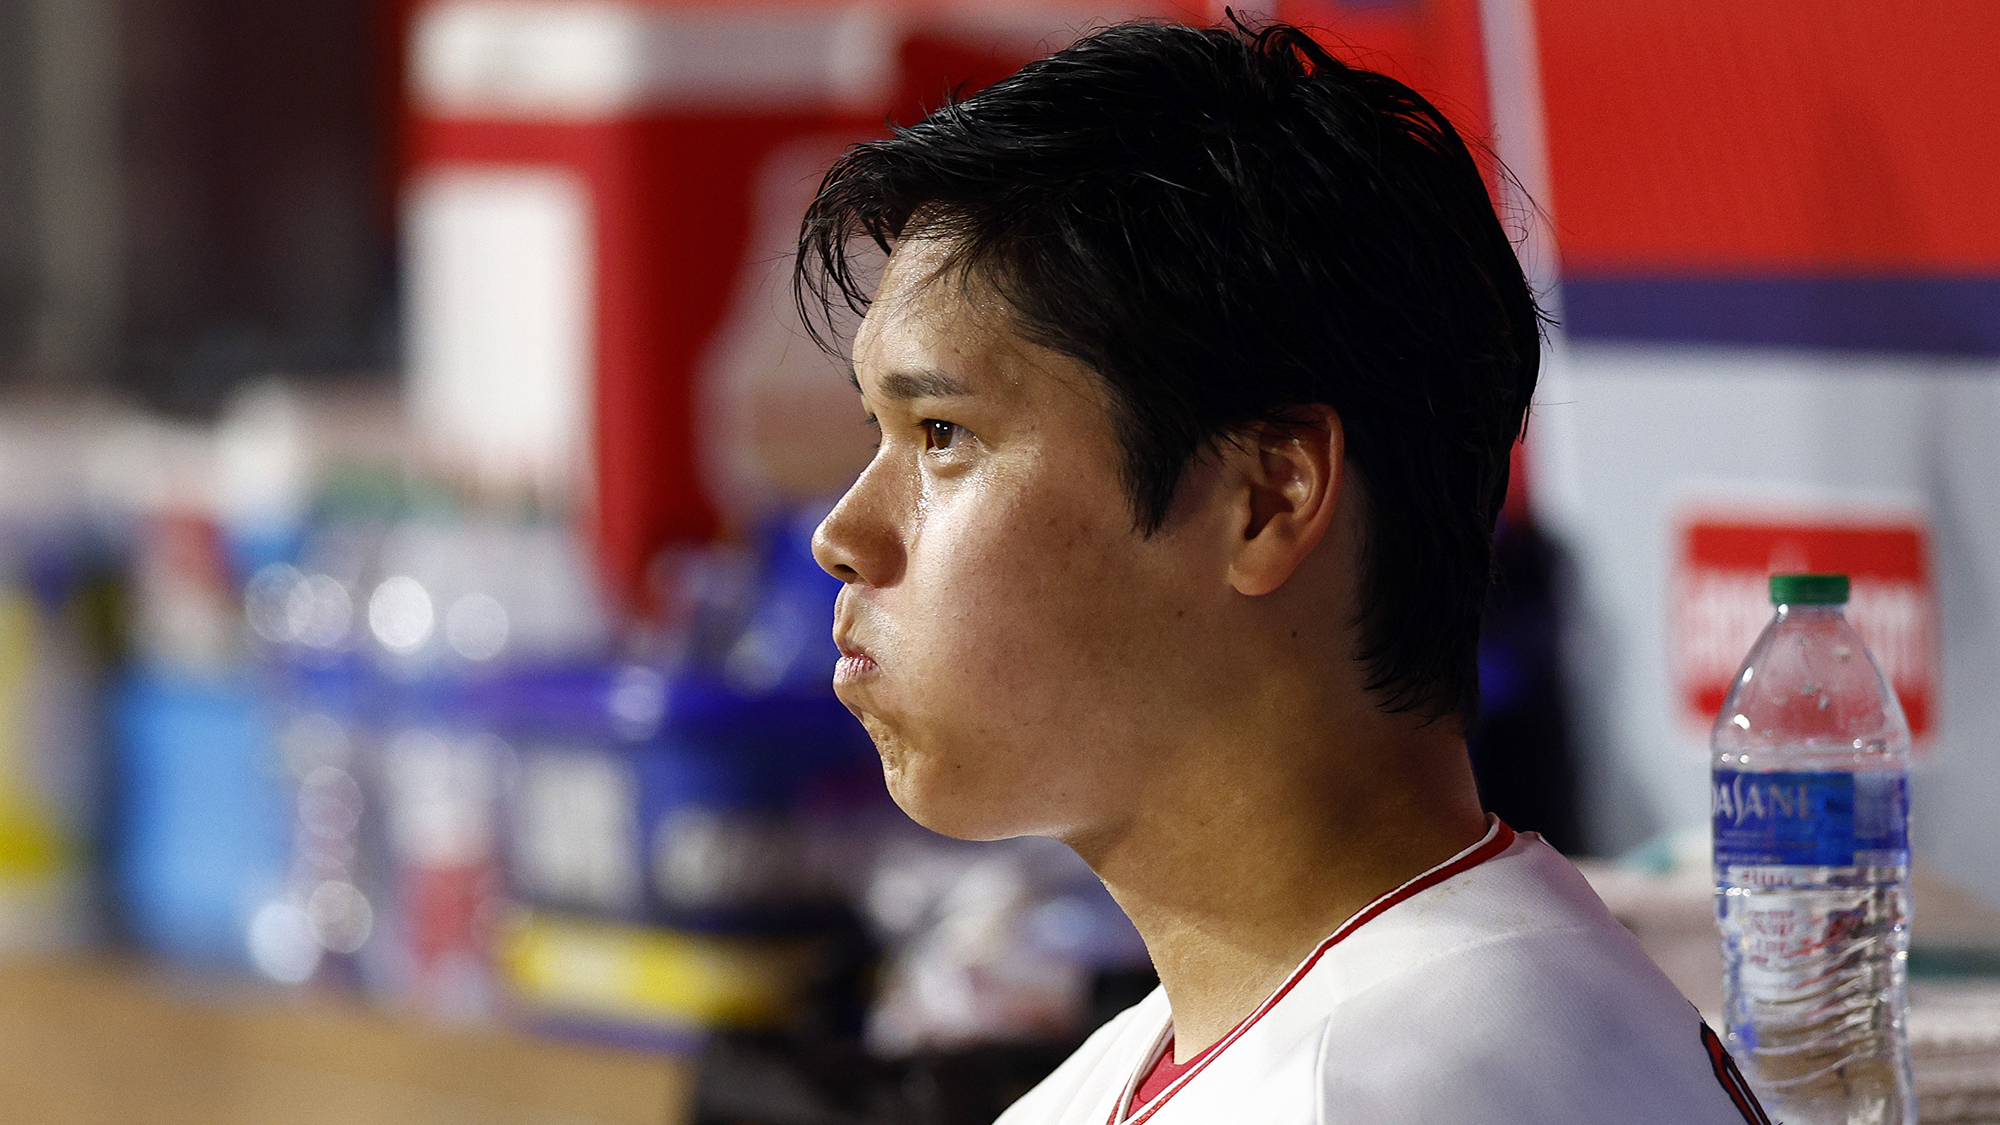 Shohei Ohtani #17 of the Los Angeles Angels on Opening Day at Angel Stadium of Anaheim on April 07, 2022 in Anaheim, California.